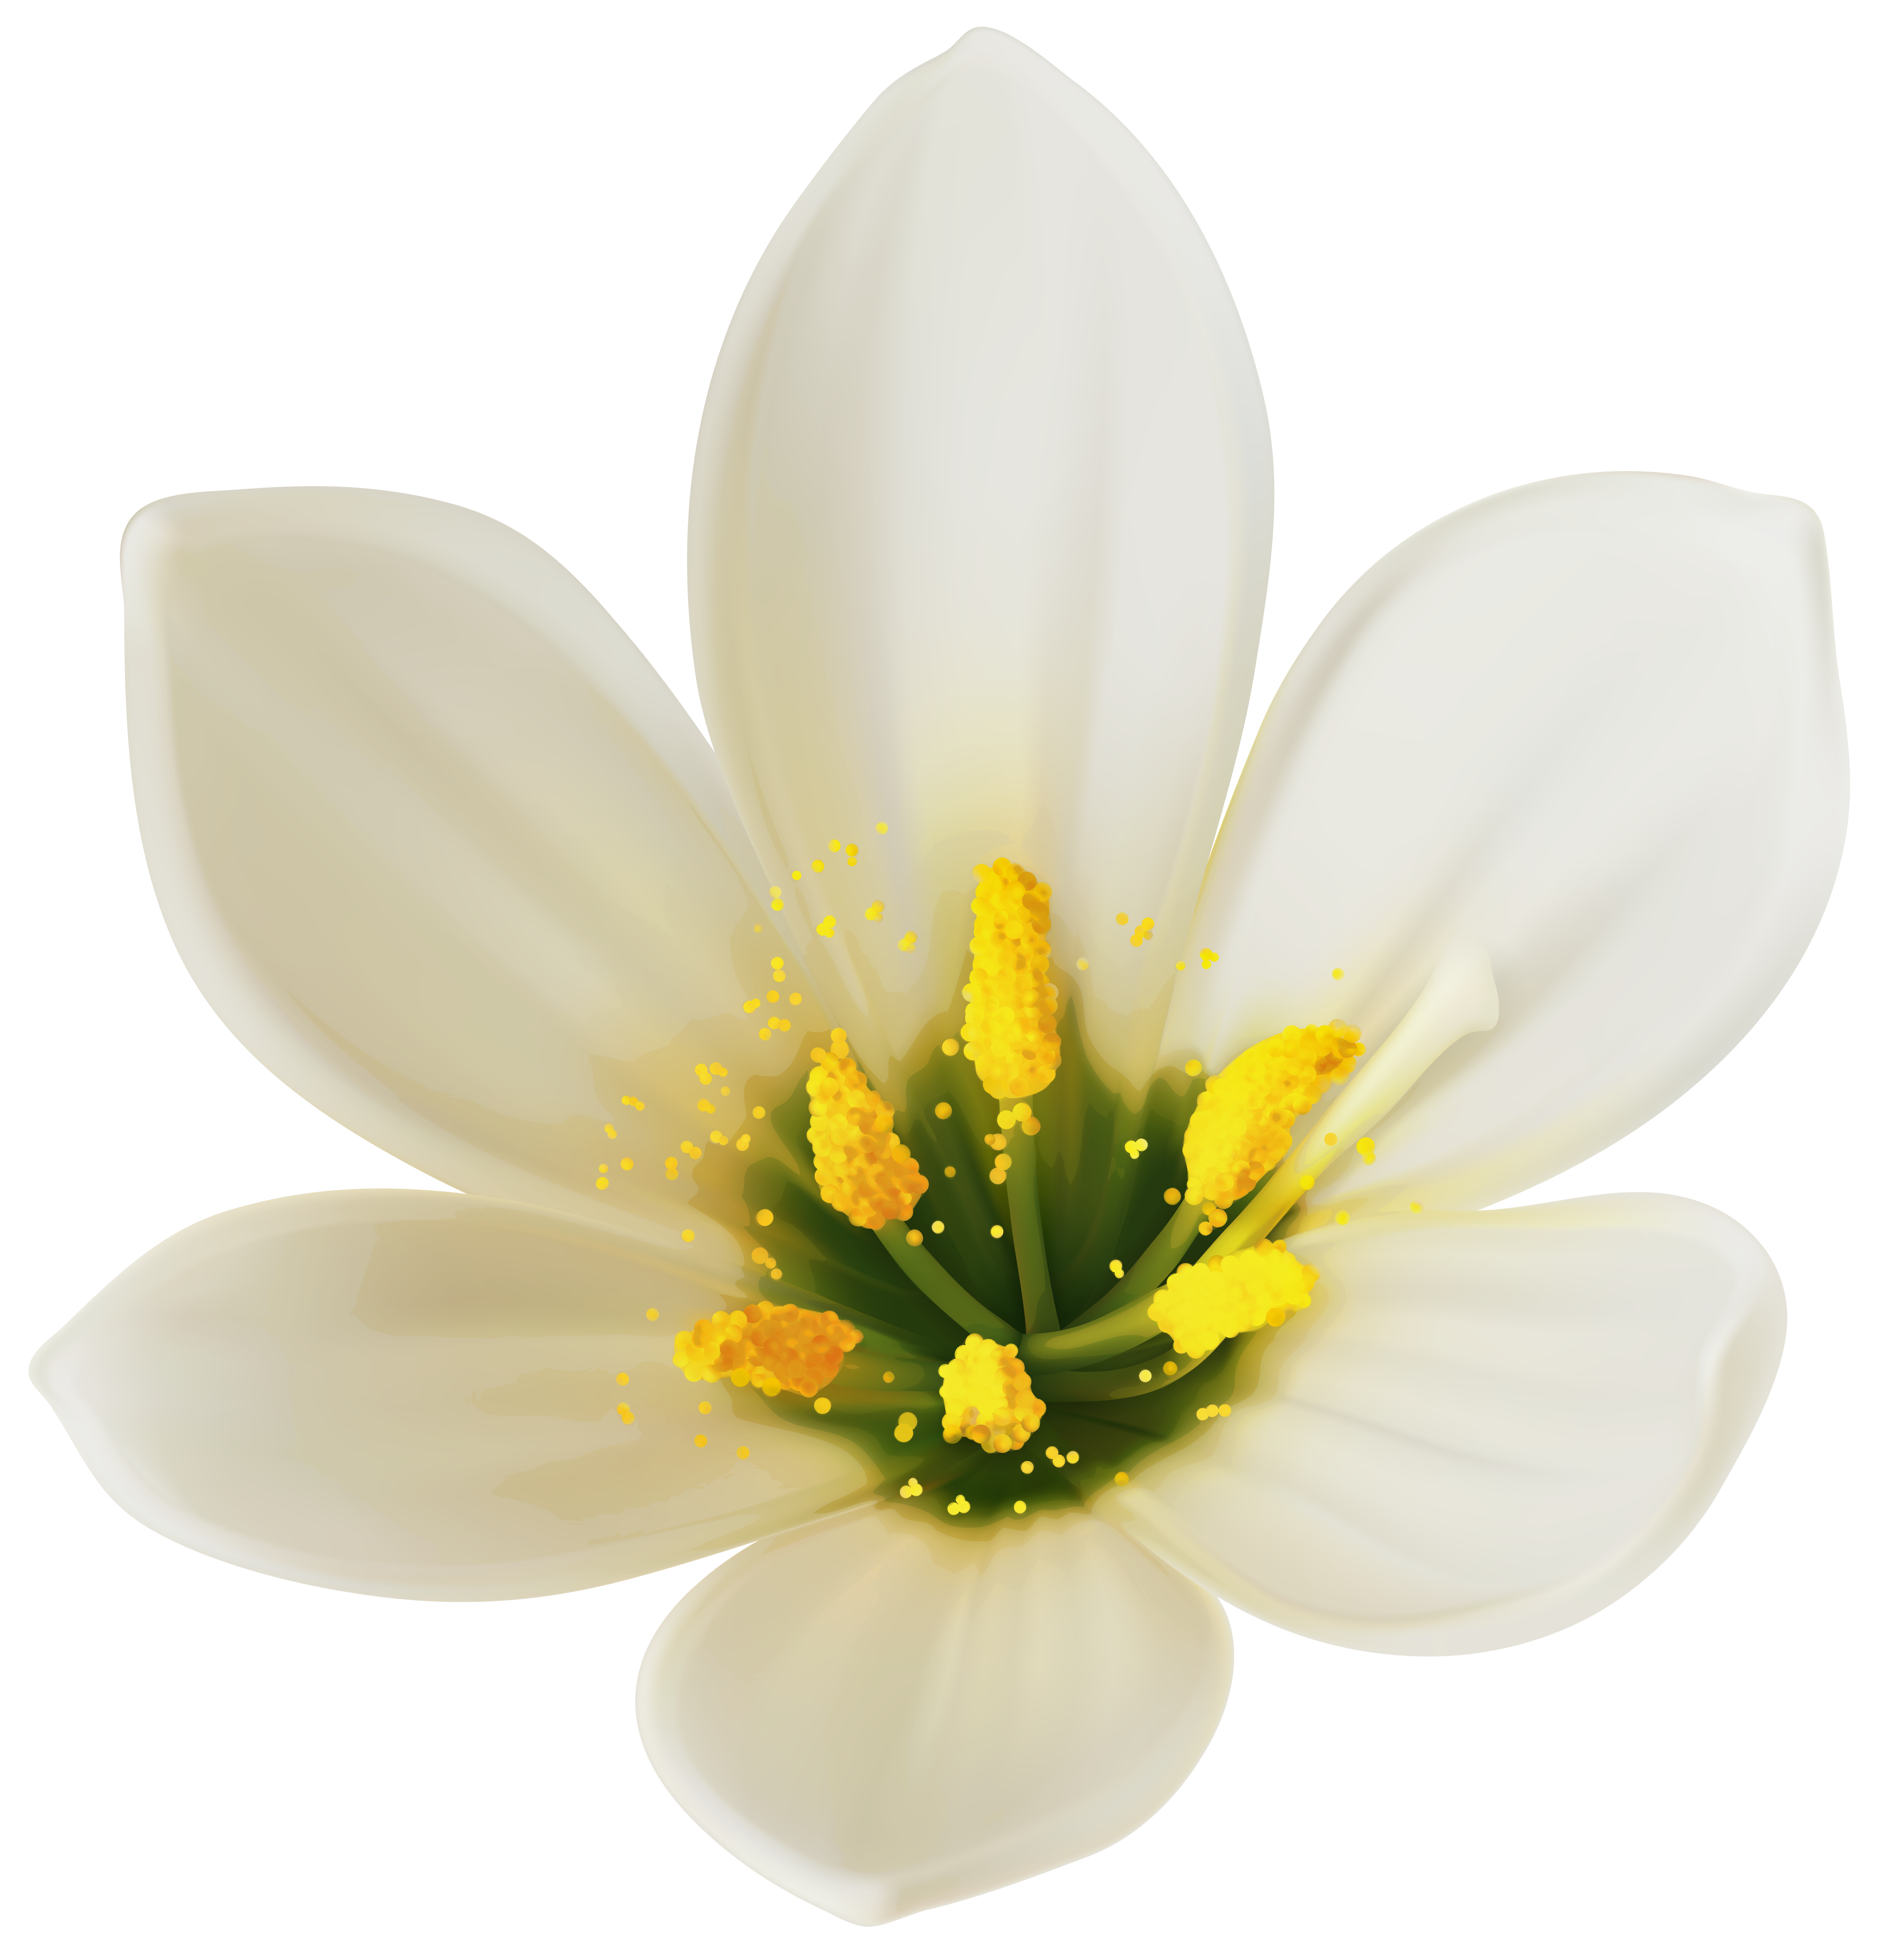 White flower clipart png. Image gallery yopriceville high